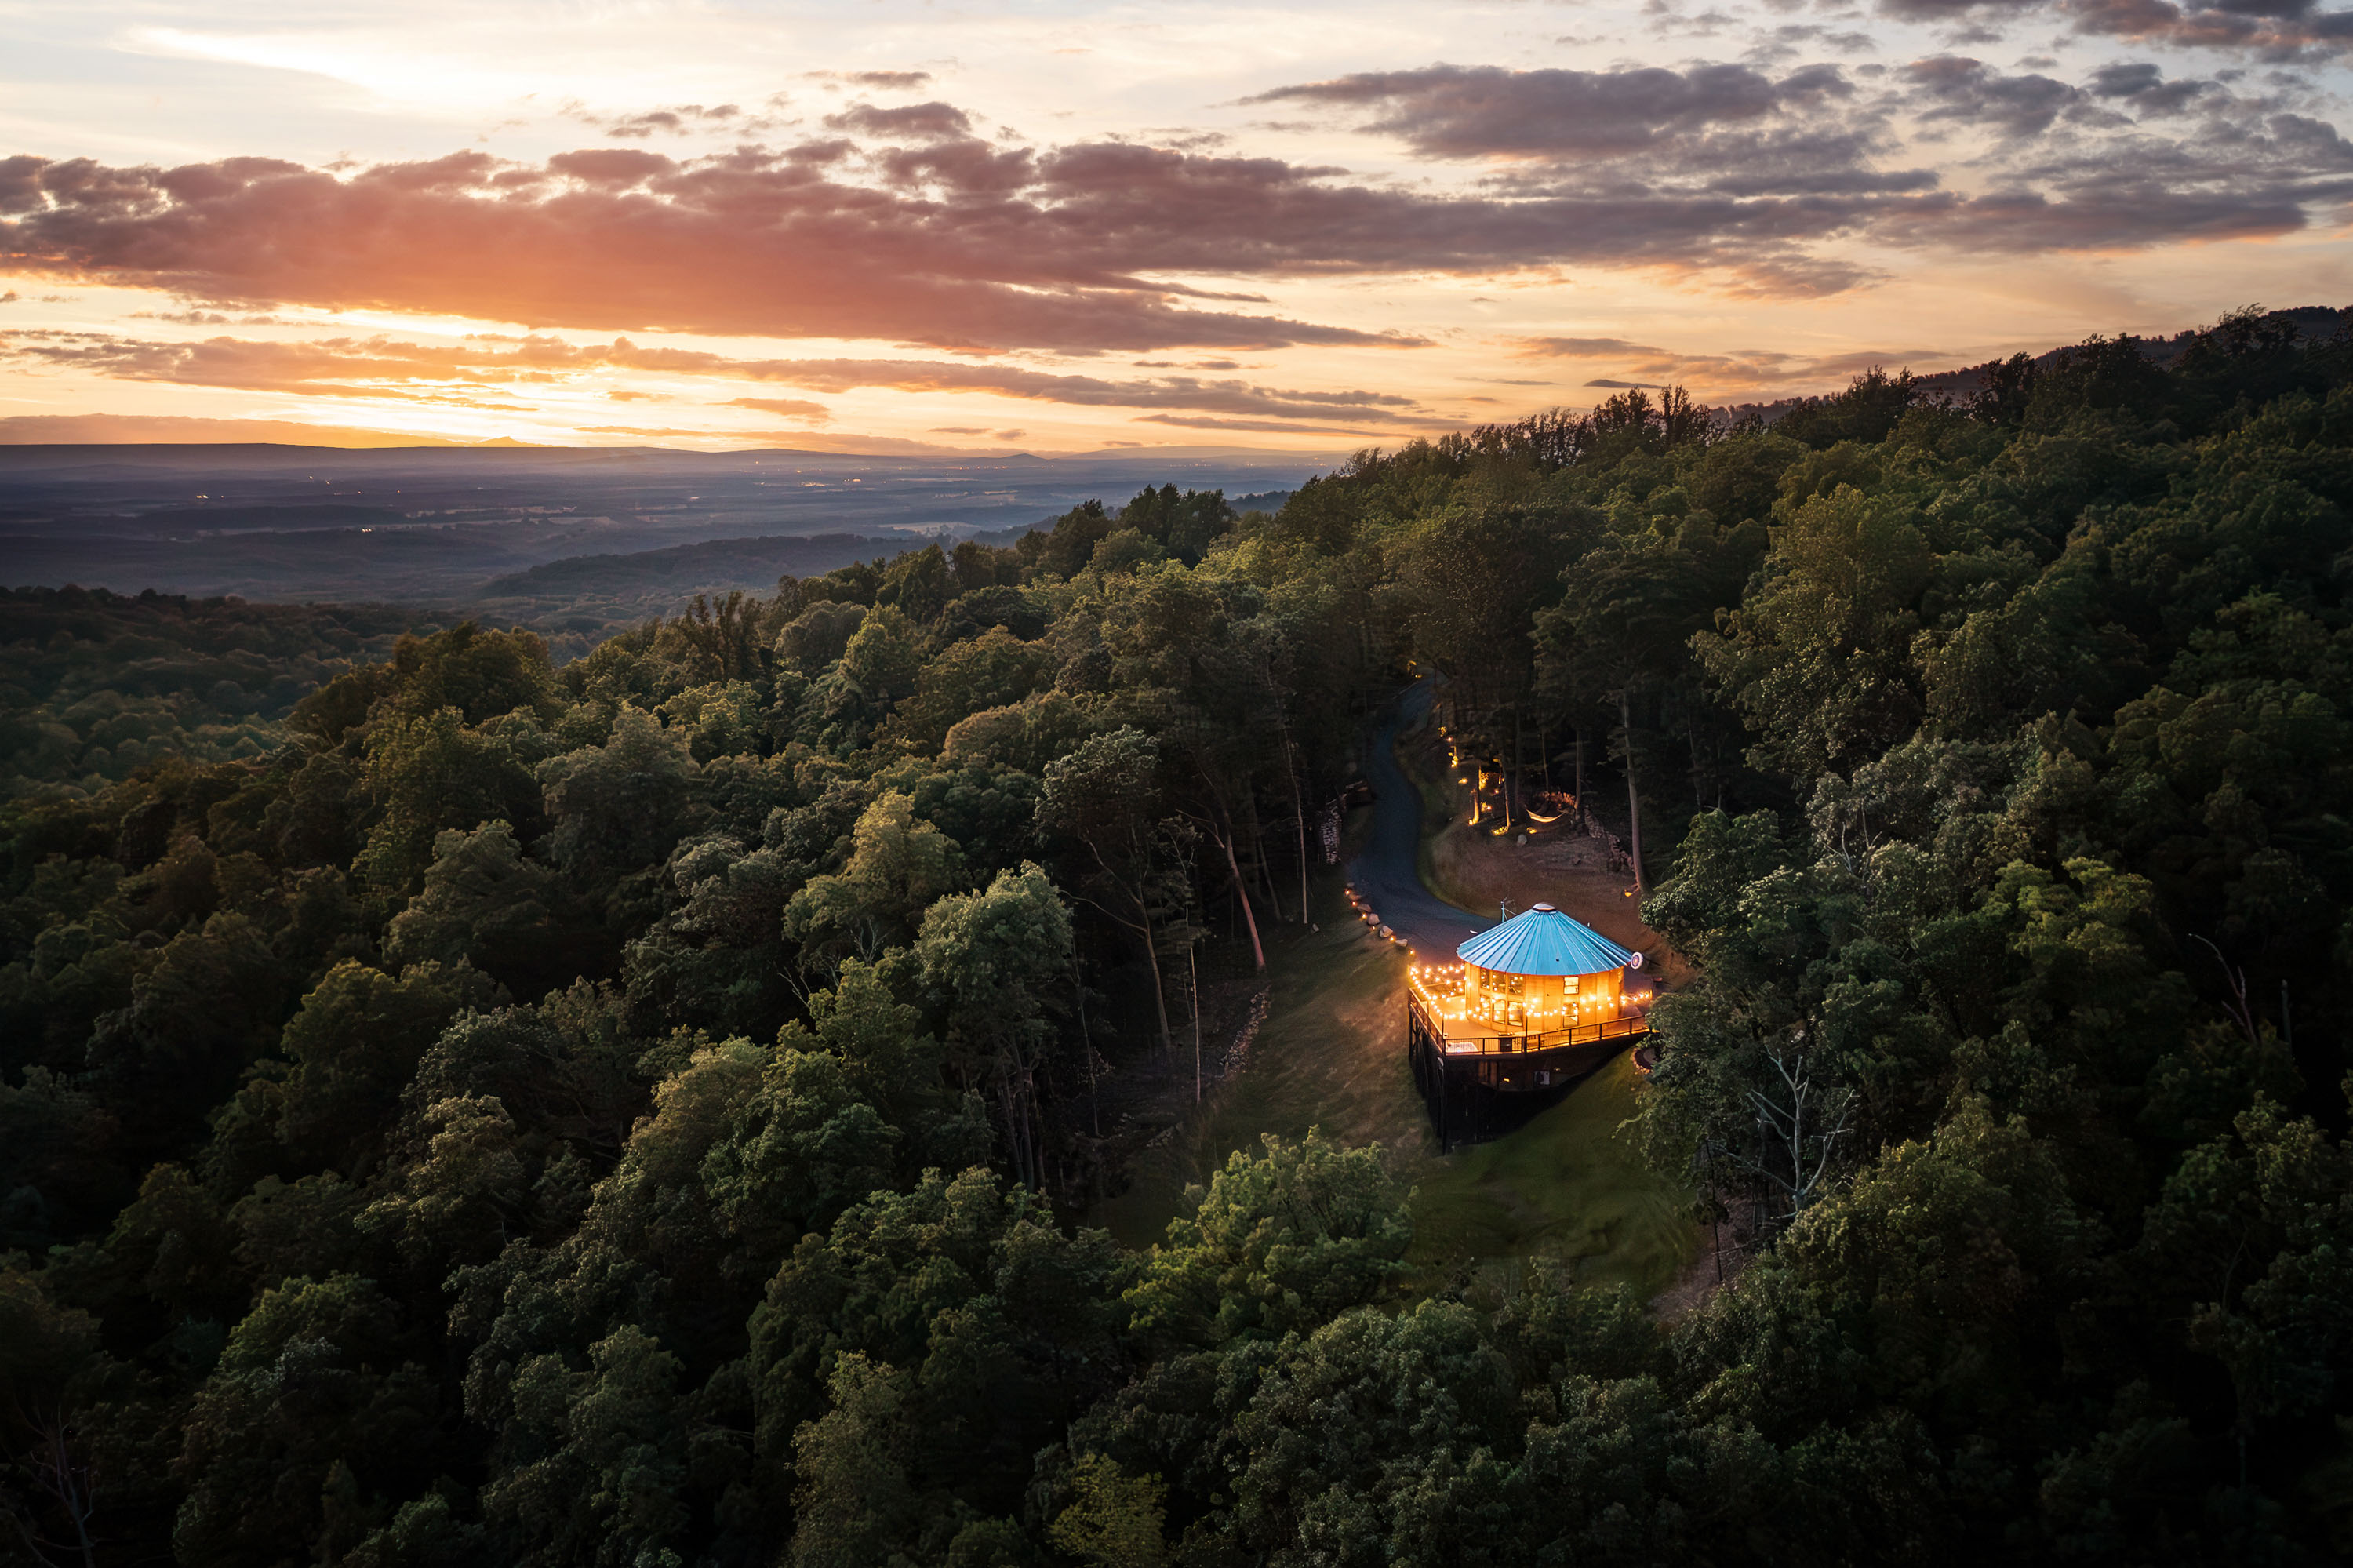 <span  class="uc_style_uc_tiles_grid_image_elementor_uc_items_attribute_title" style="color:#ffffff;">Drone aerial photo, Blue Ridge Mountains View, sunset - Skyline Yurt</span>